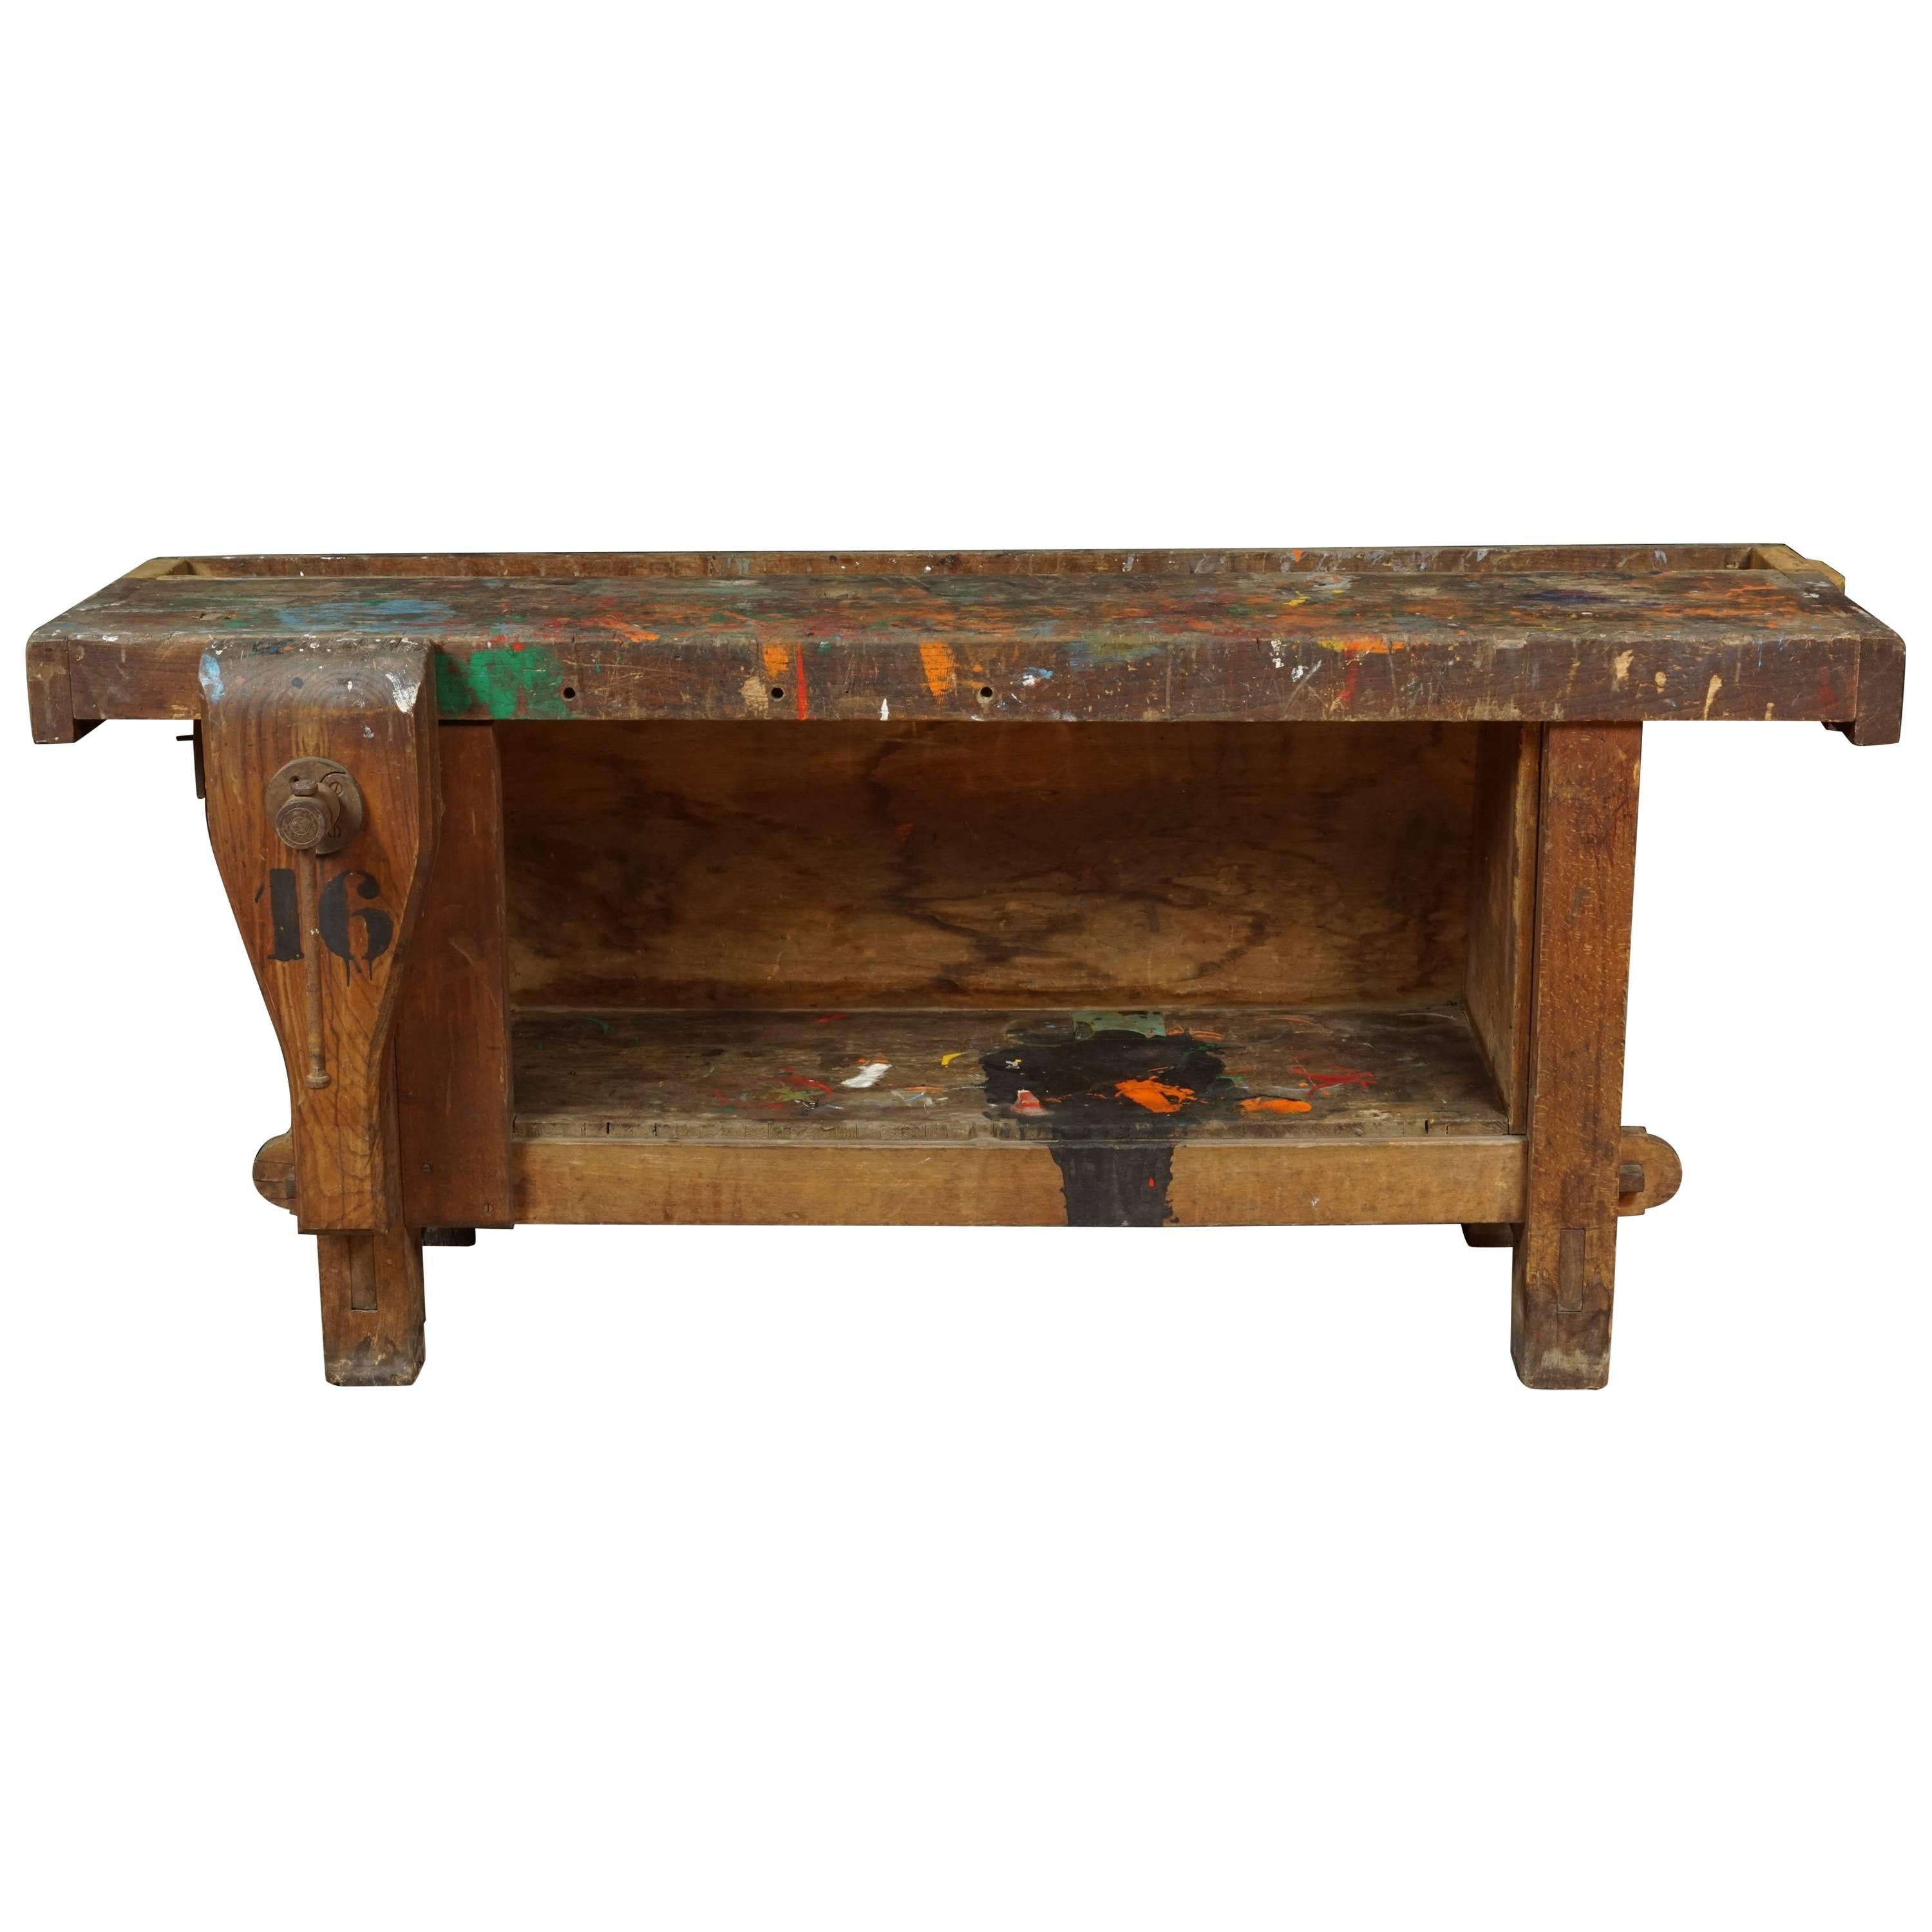 Primitive Work Bench from France, circa 1940